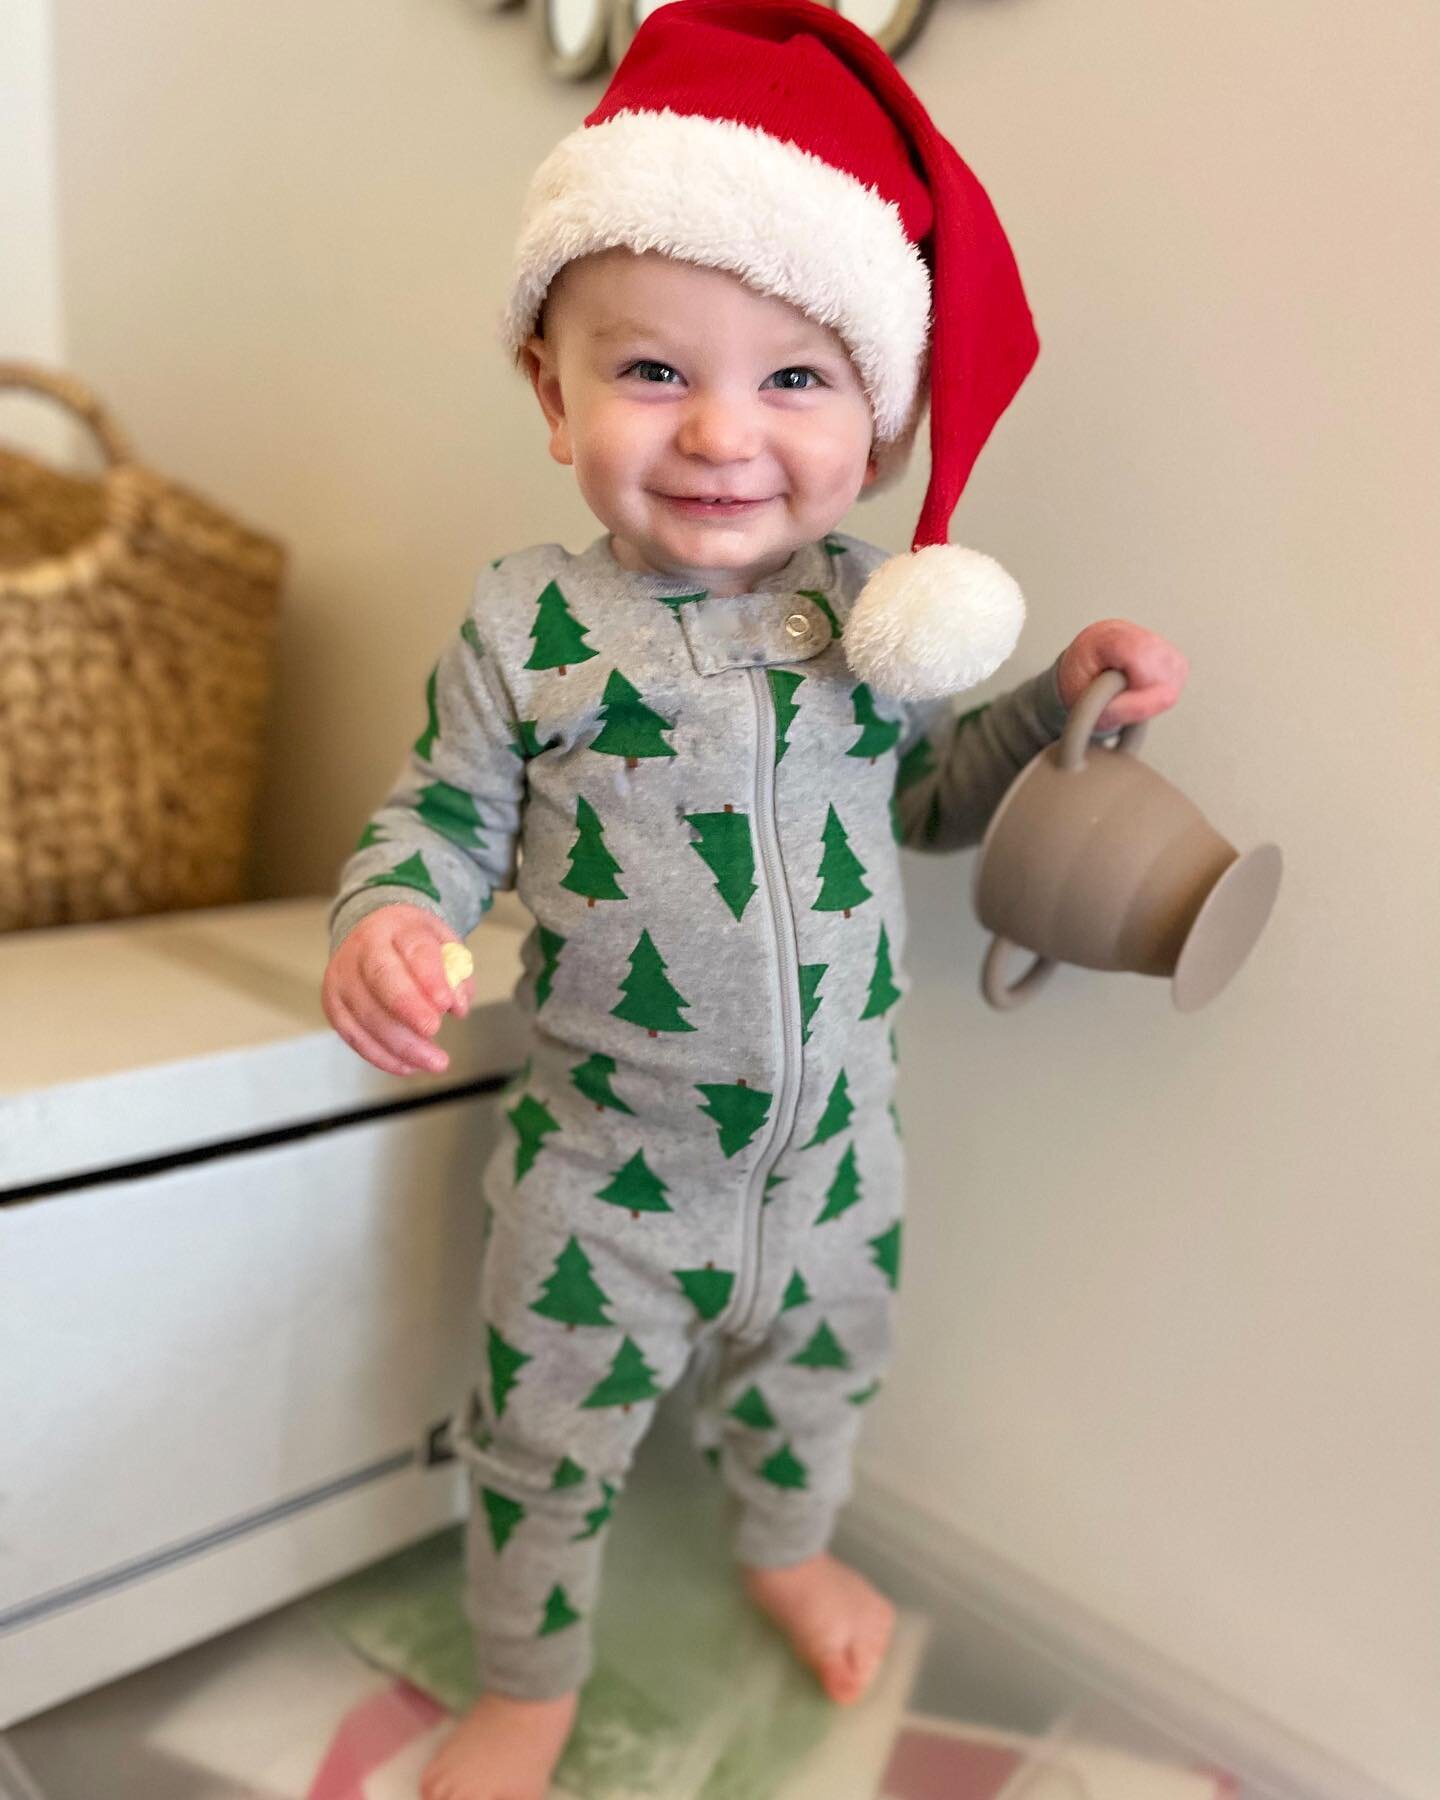 It&rsquo;s Christmas week and we&rsquo;re ready for Santa!🎄